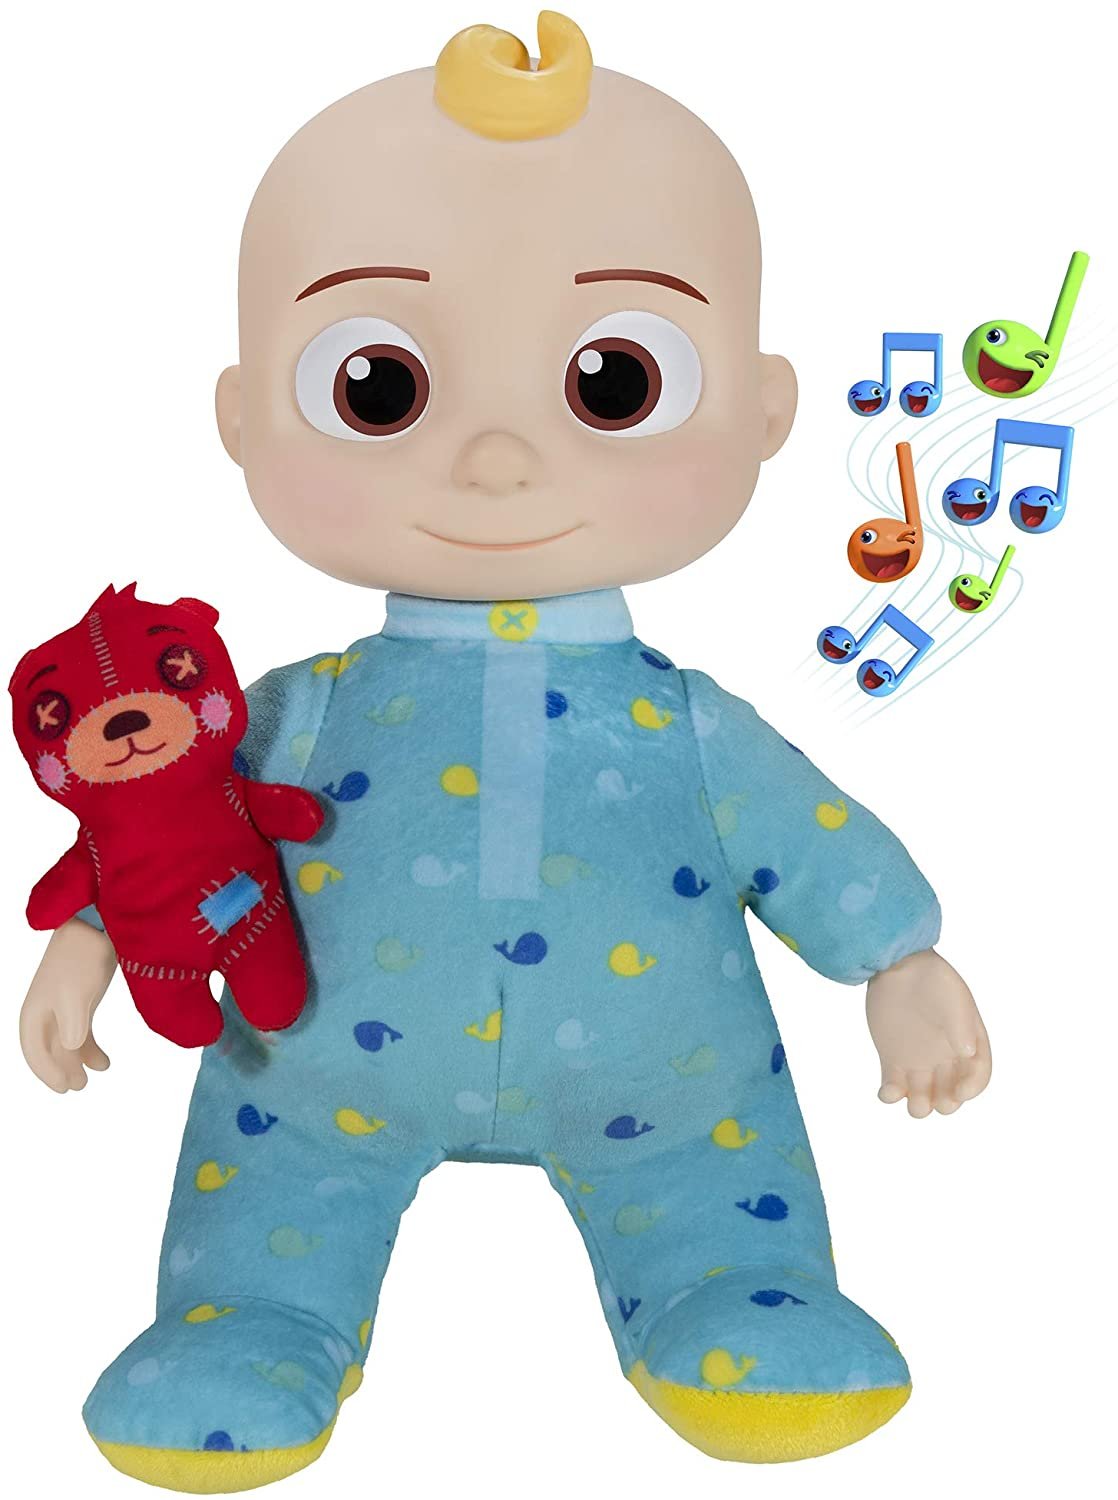 10. CoComelon Official Musical Bedtime JJ Doll 